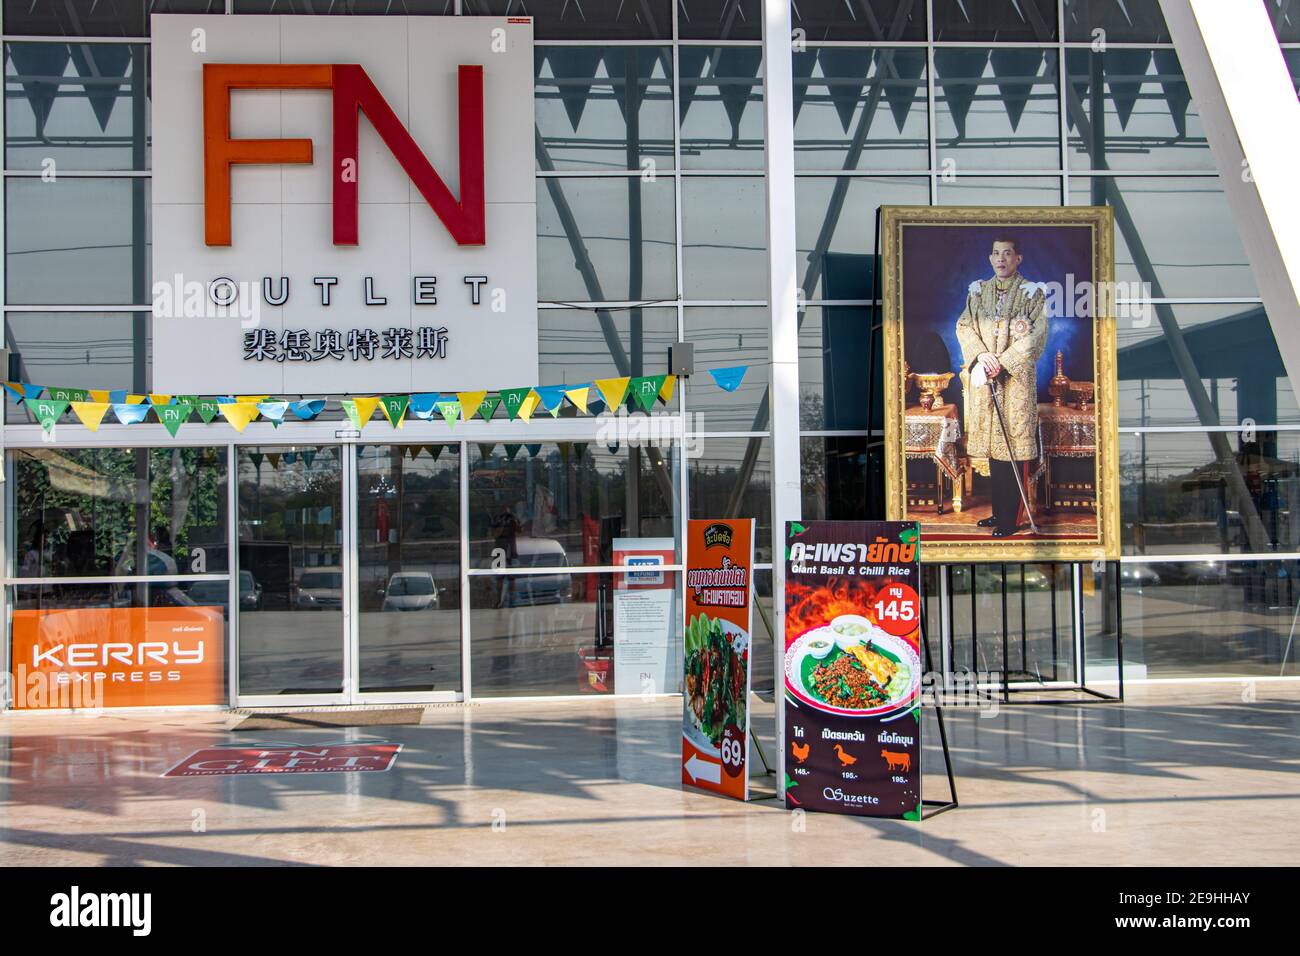 The main entrance to the outlet mall with the image of the Thai king. Stock Photo